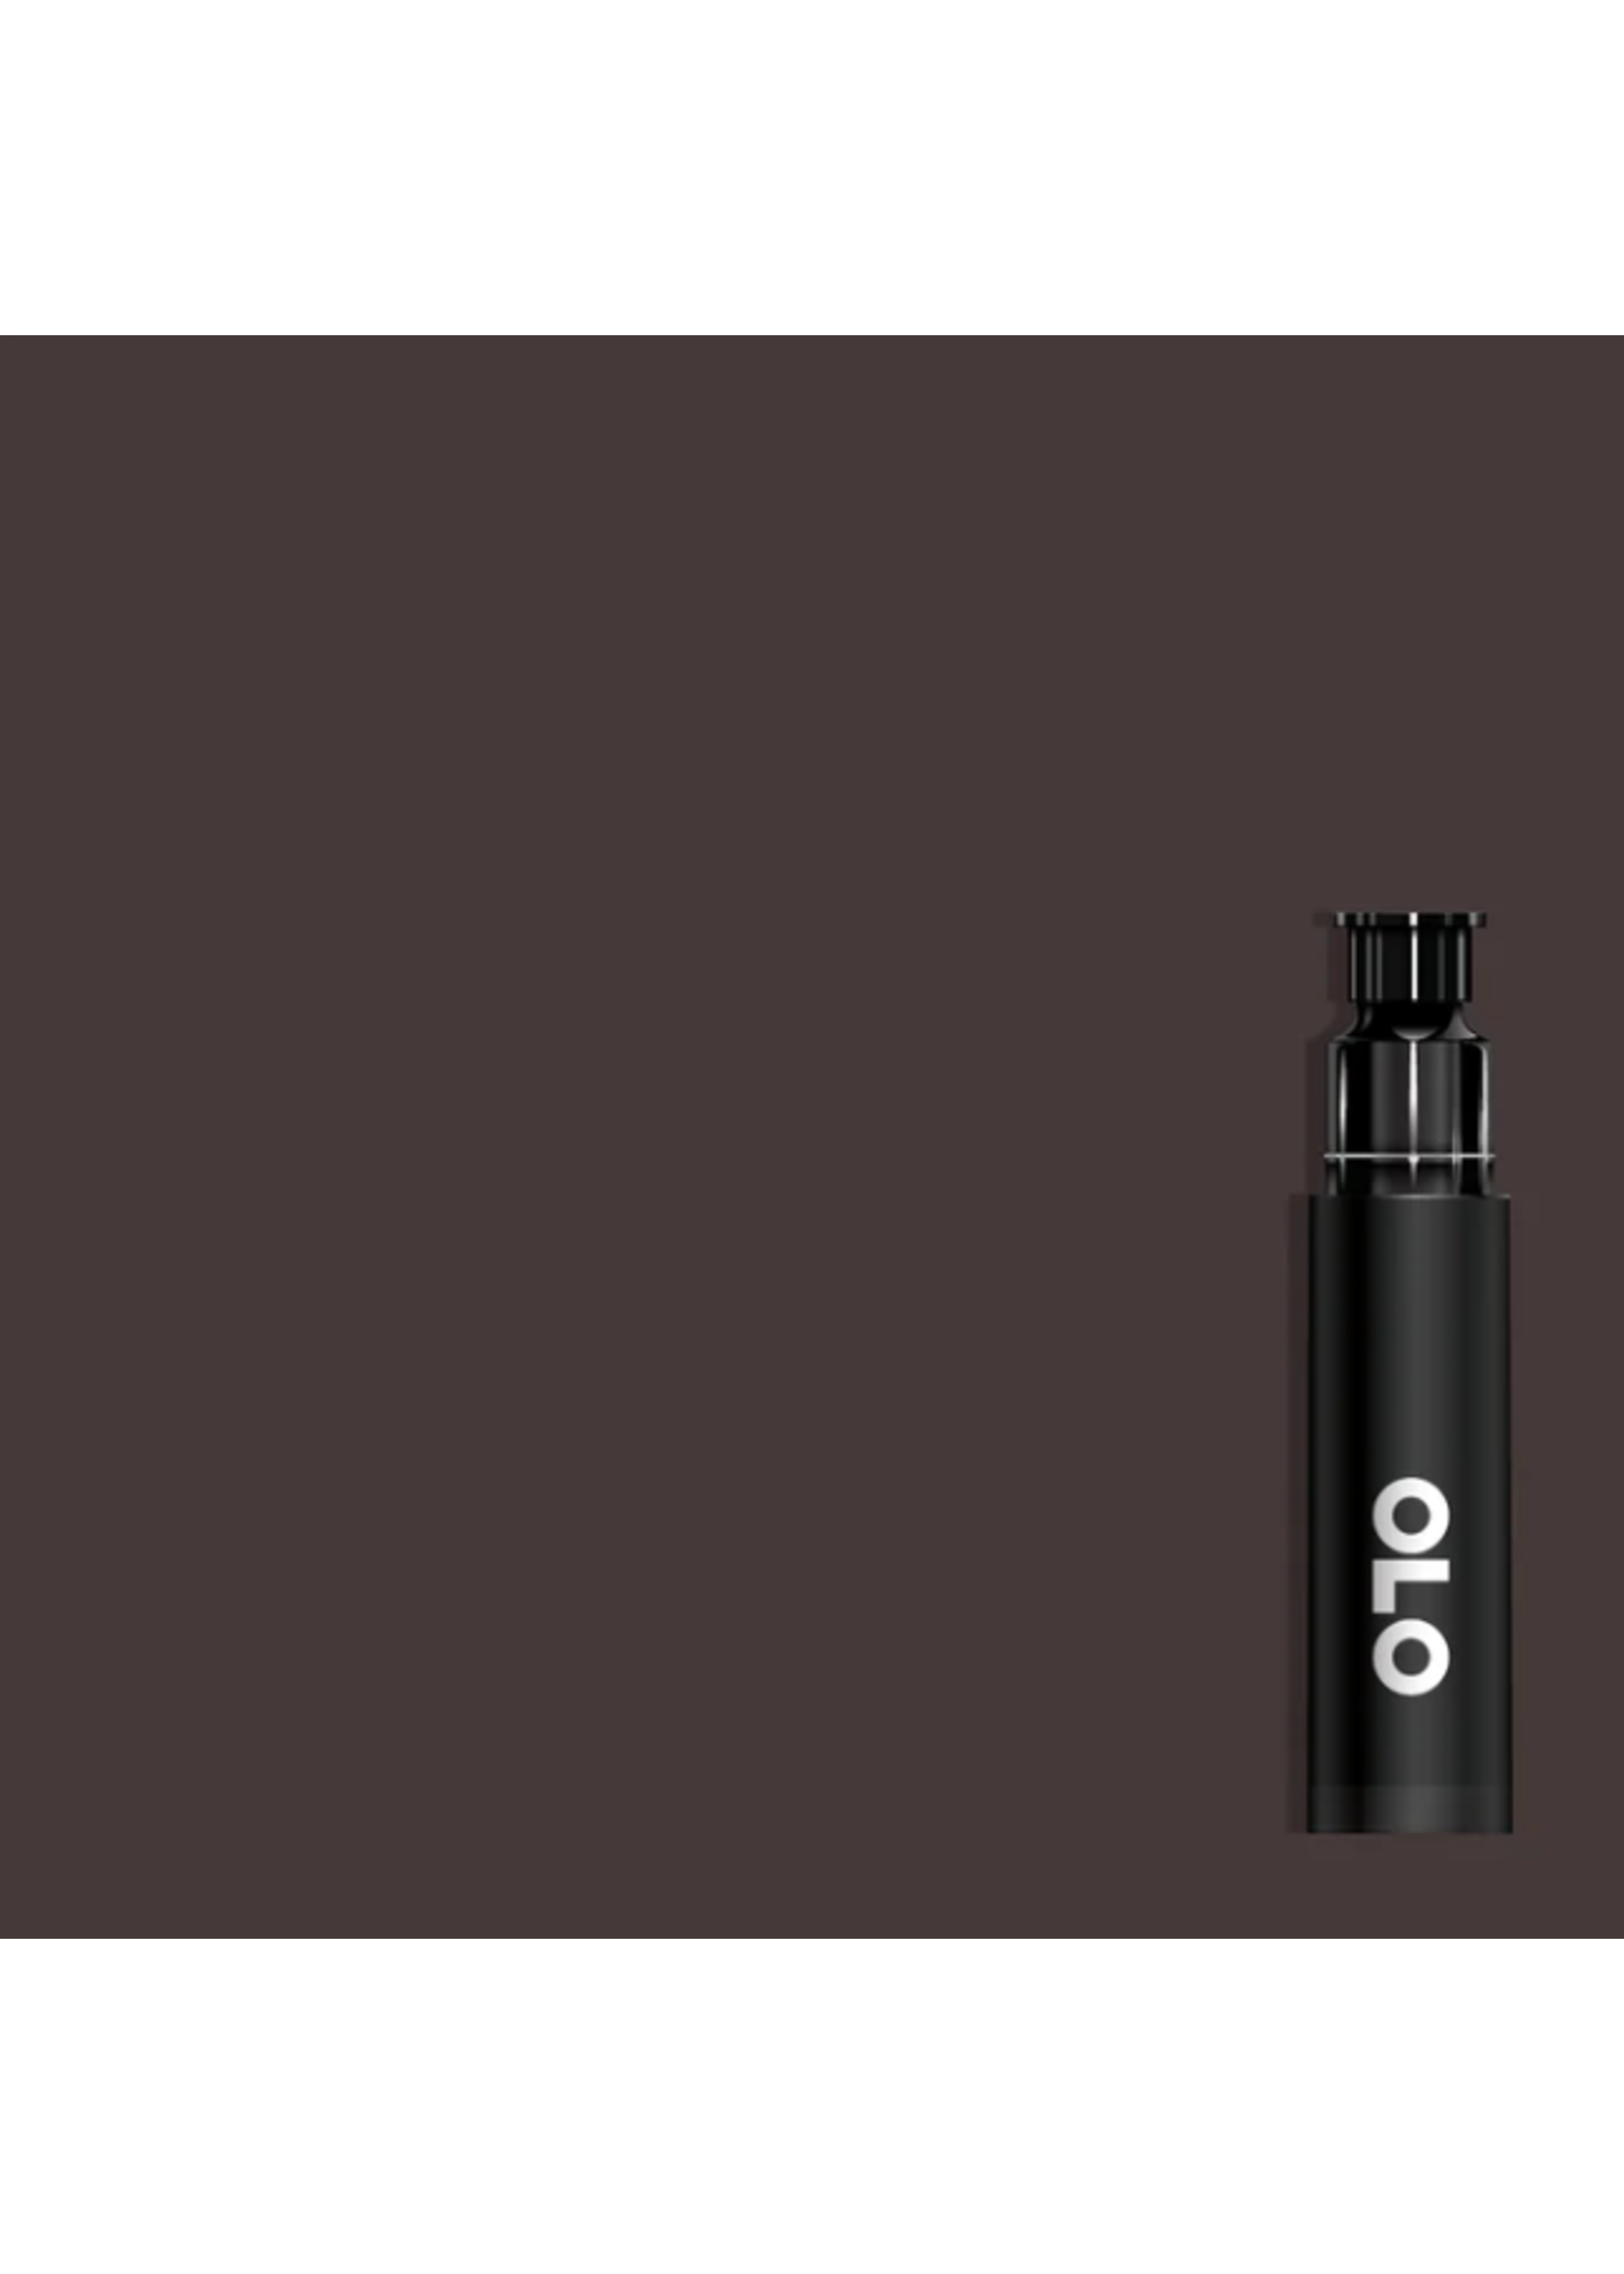 OLO OLO Brush Replacement Cartridge: Red Gray 7